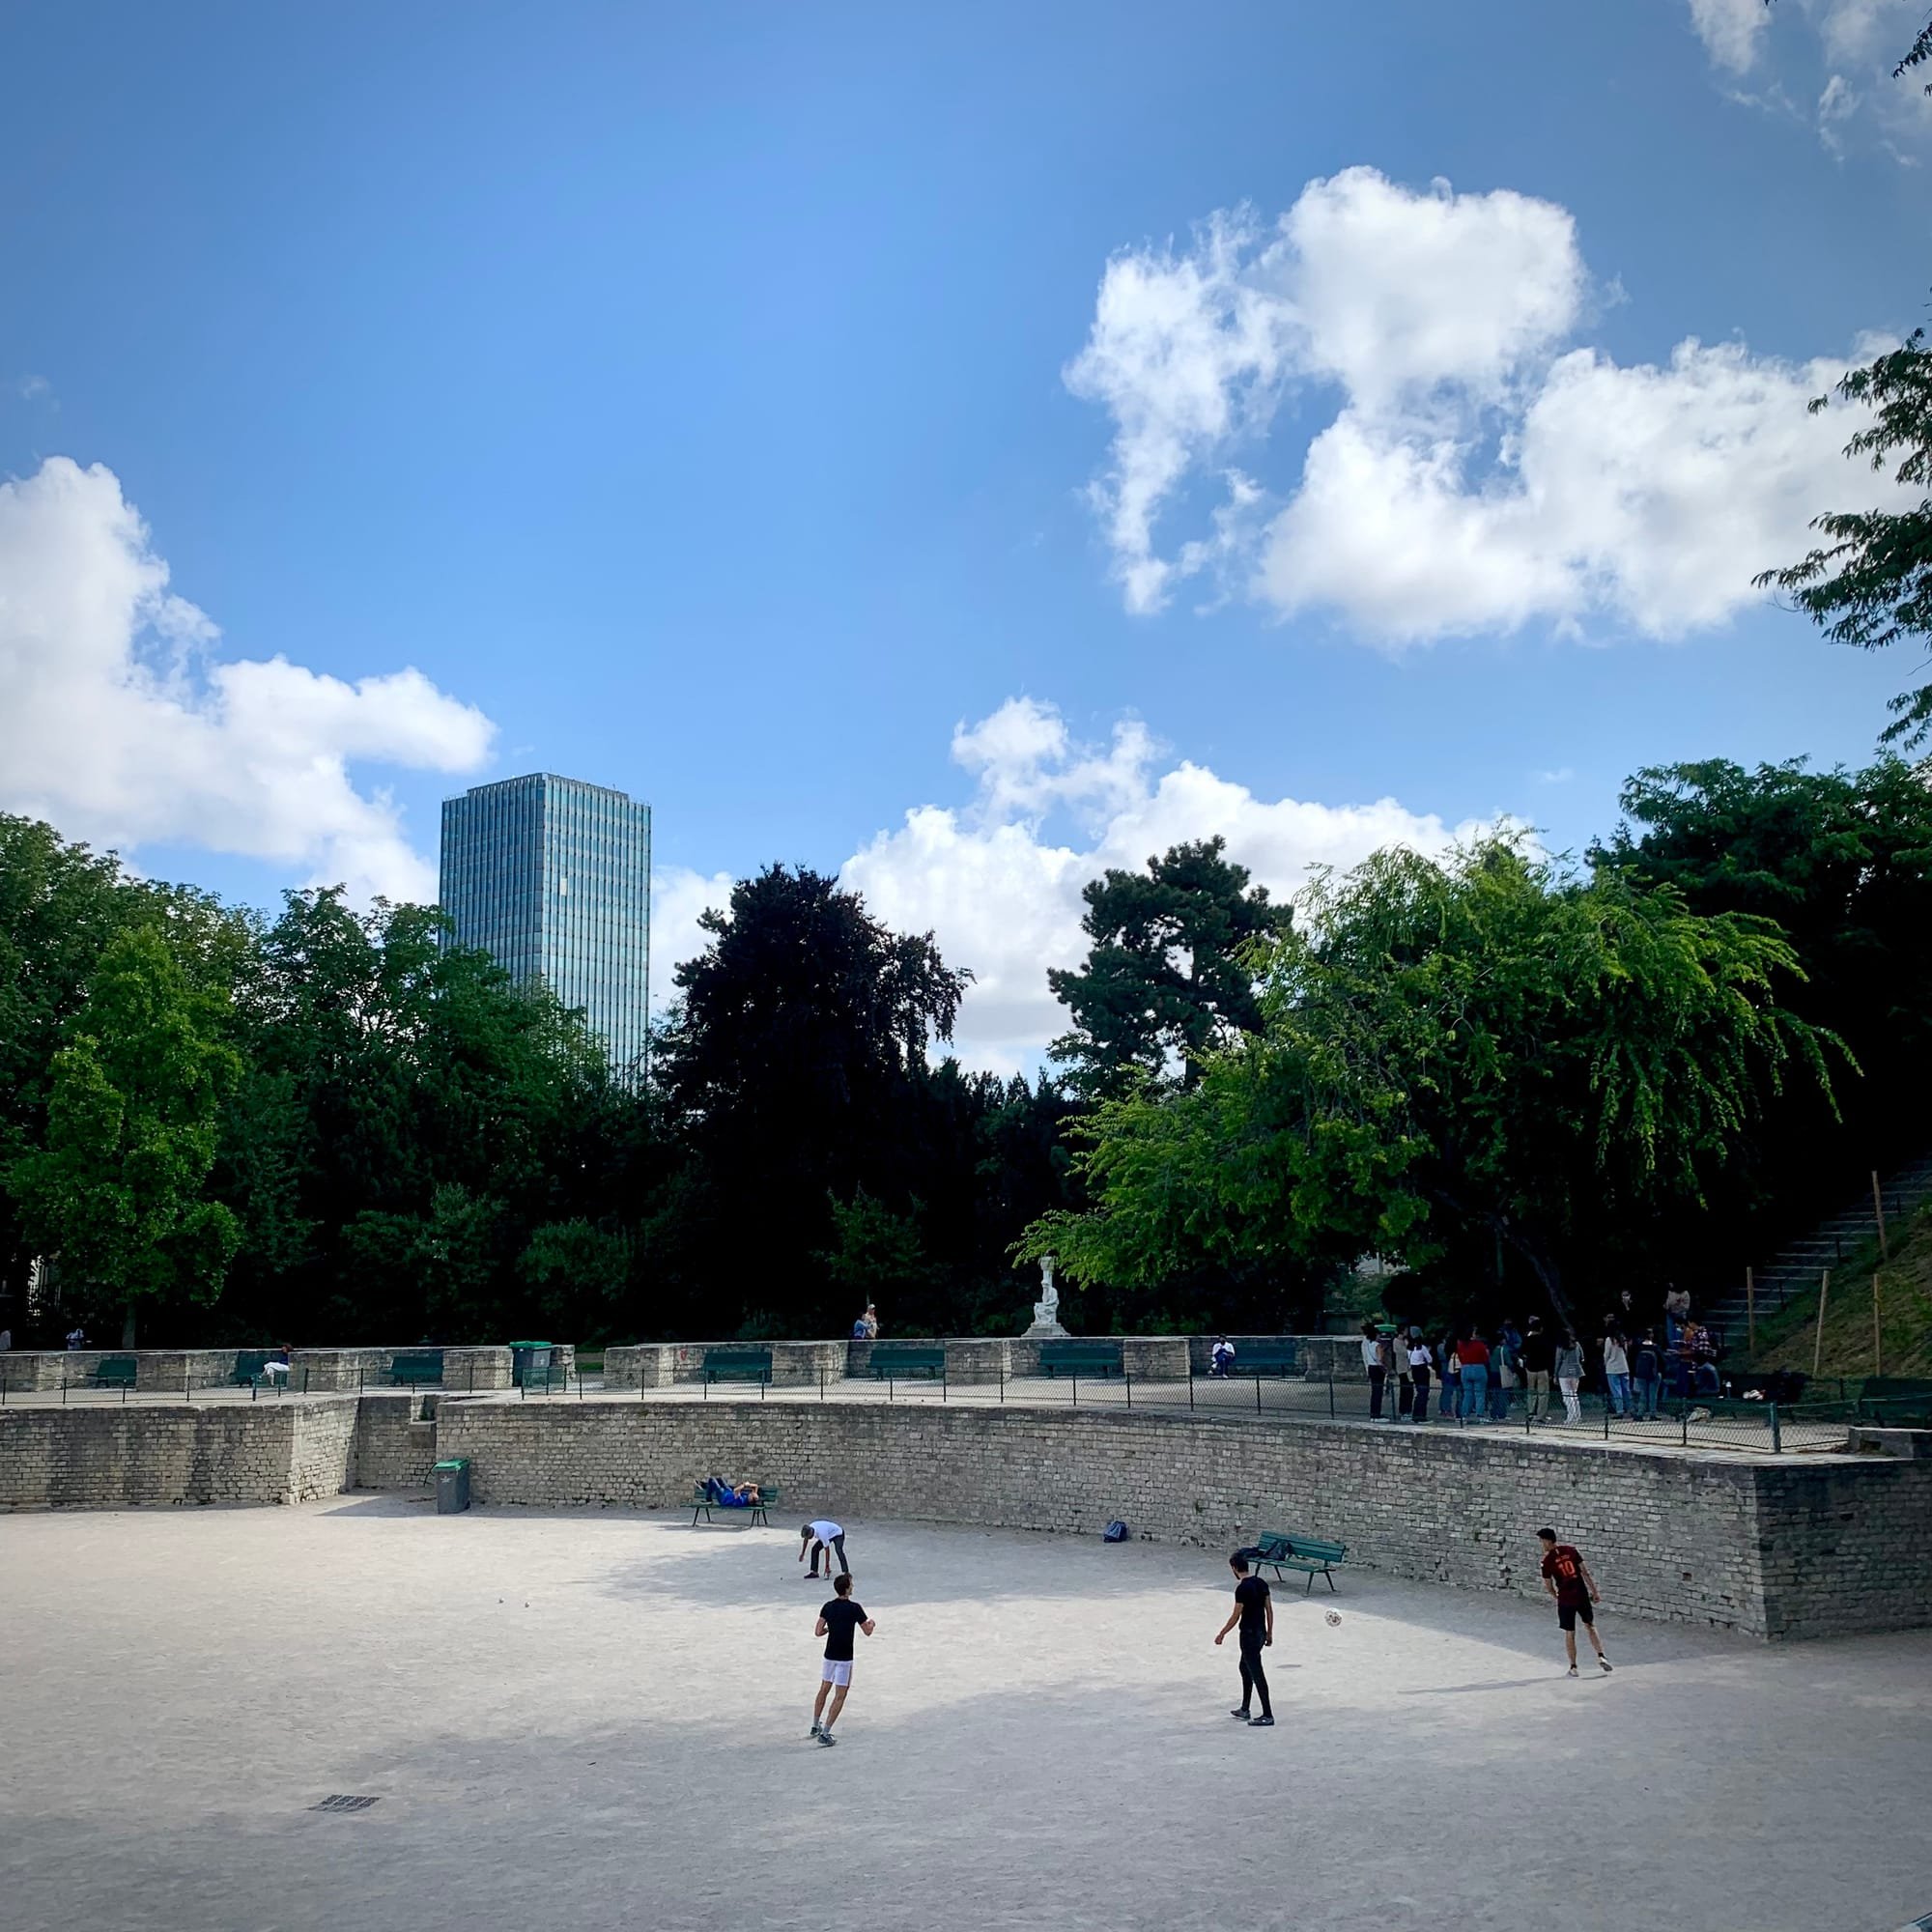 View of the Lutetia arenas: children playing soccer in the arenas, a pleasant blue sky. In the background: the Zamanski tower on the Jussieu campus.